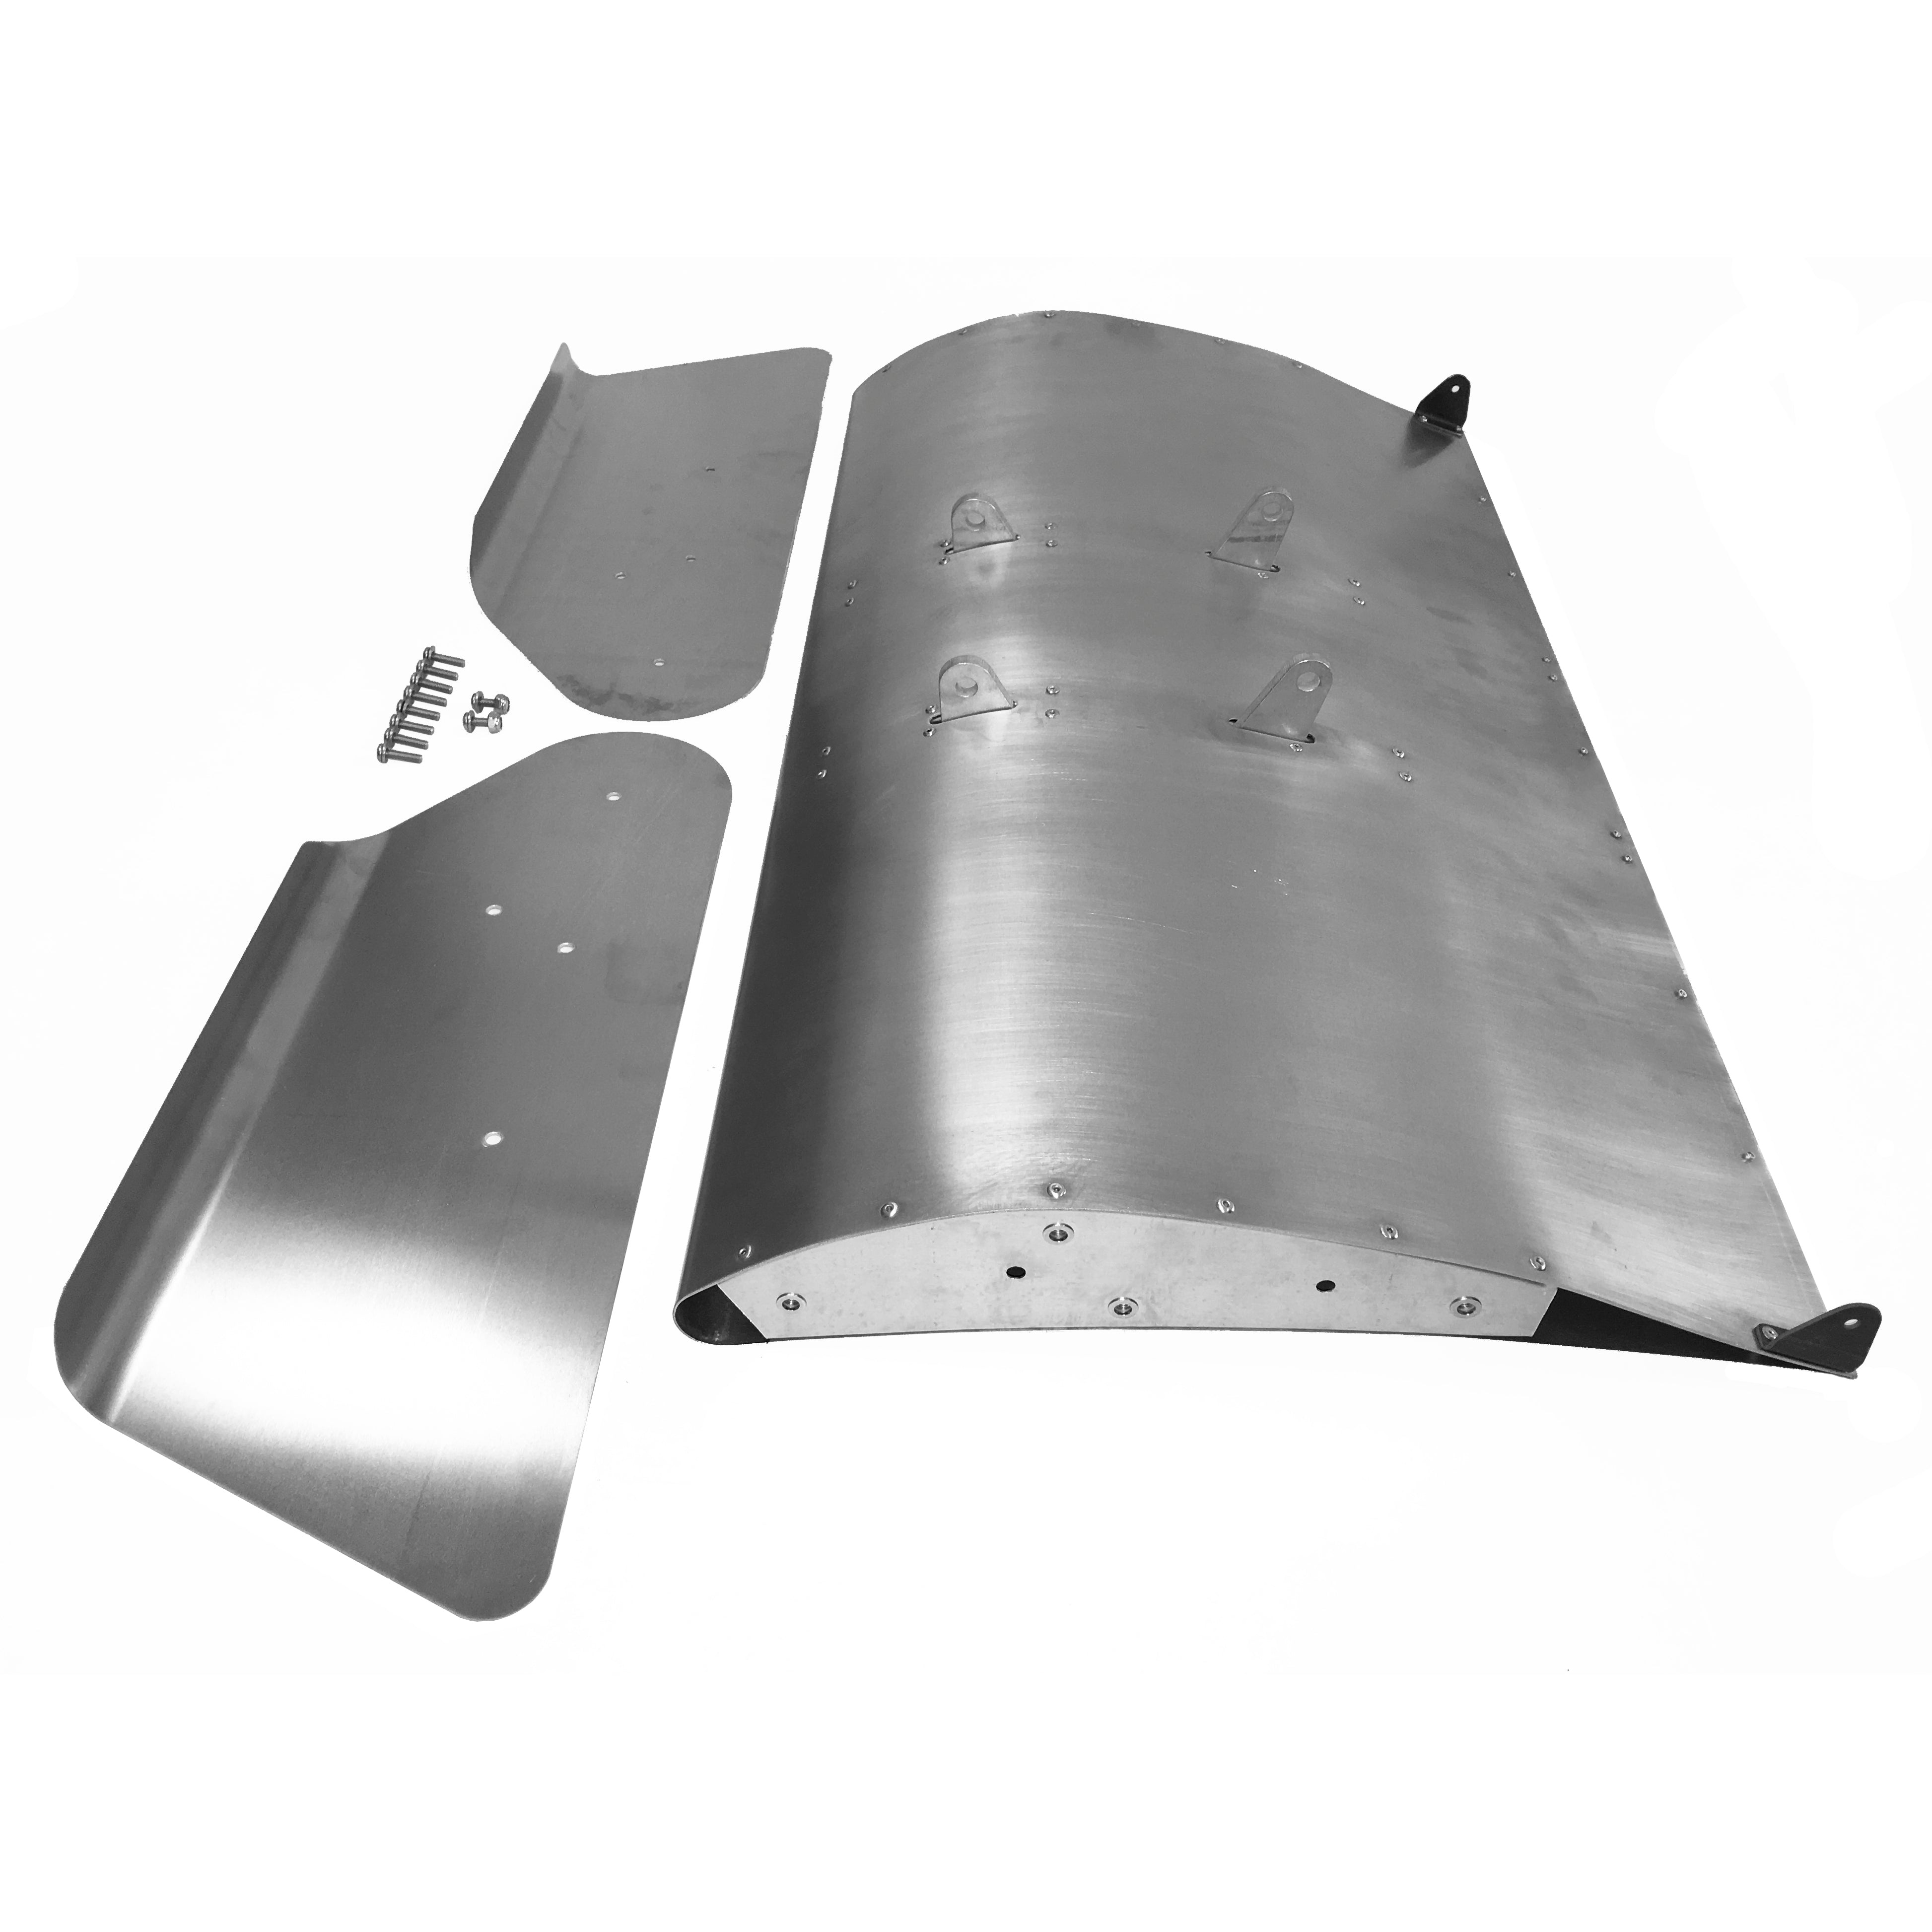 48" Dragster Wing With Nostalgia Spill Plates 05-027N